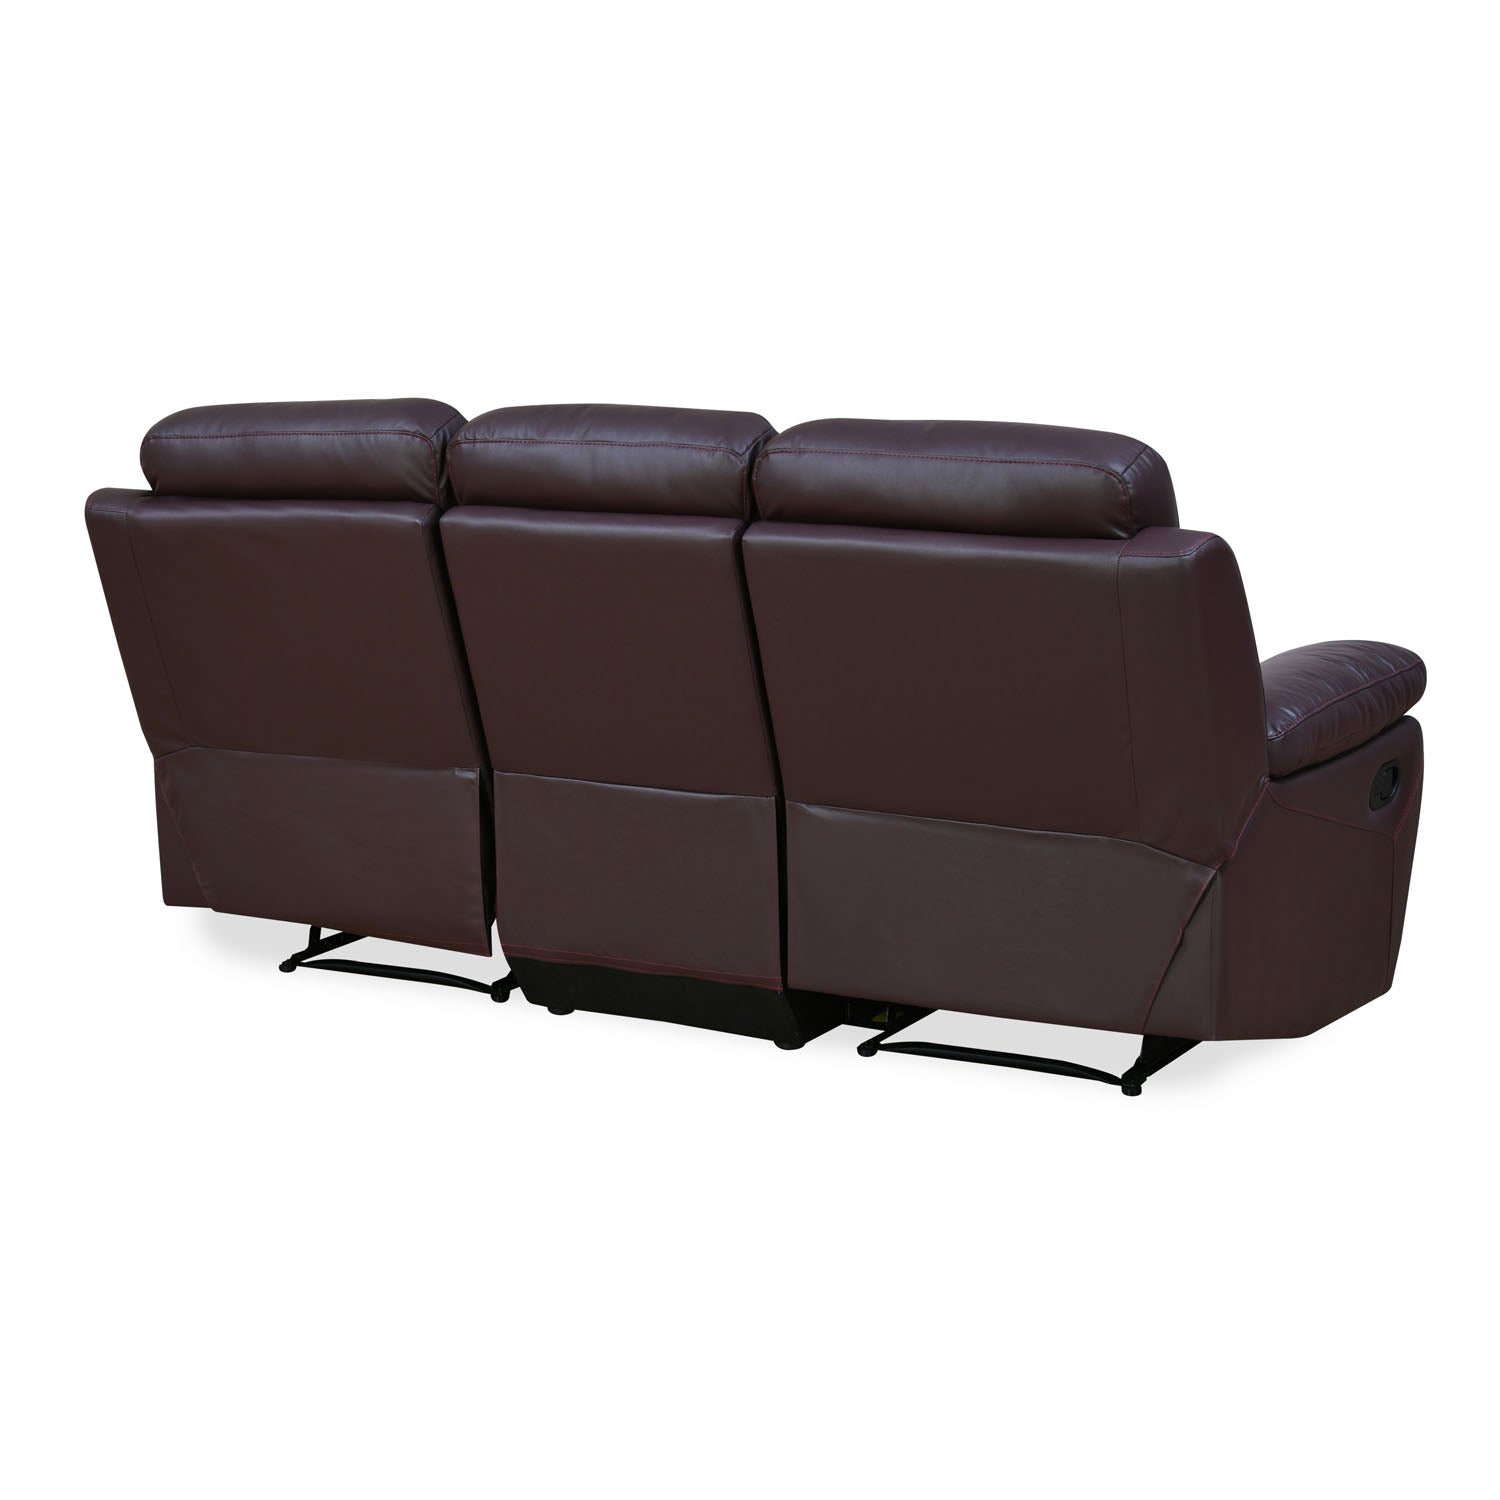 Mandy 3 Seater Leather Manual Recliner (Burgundy)